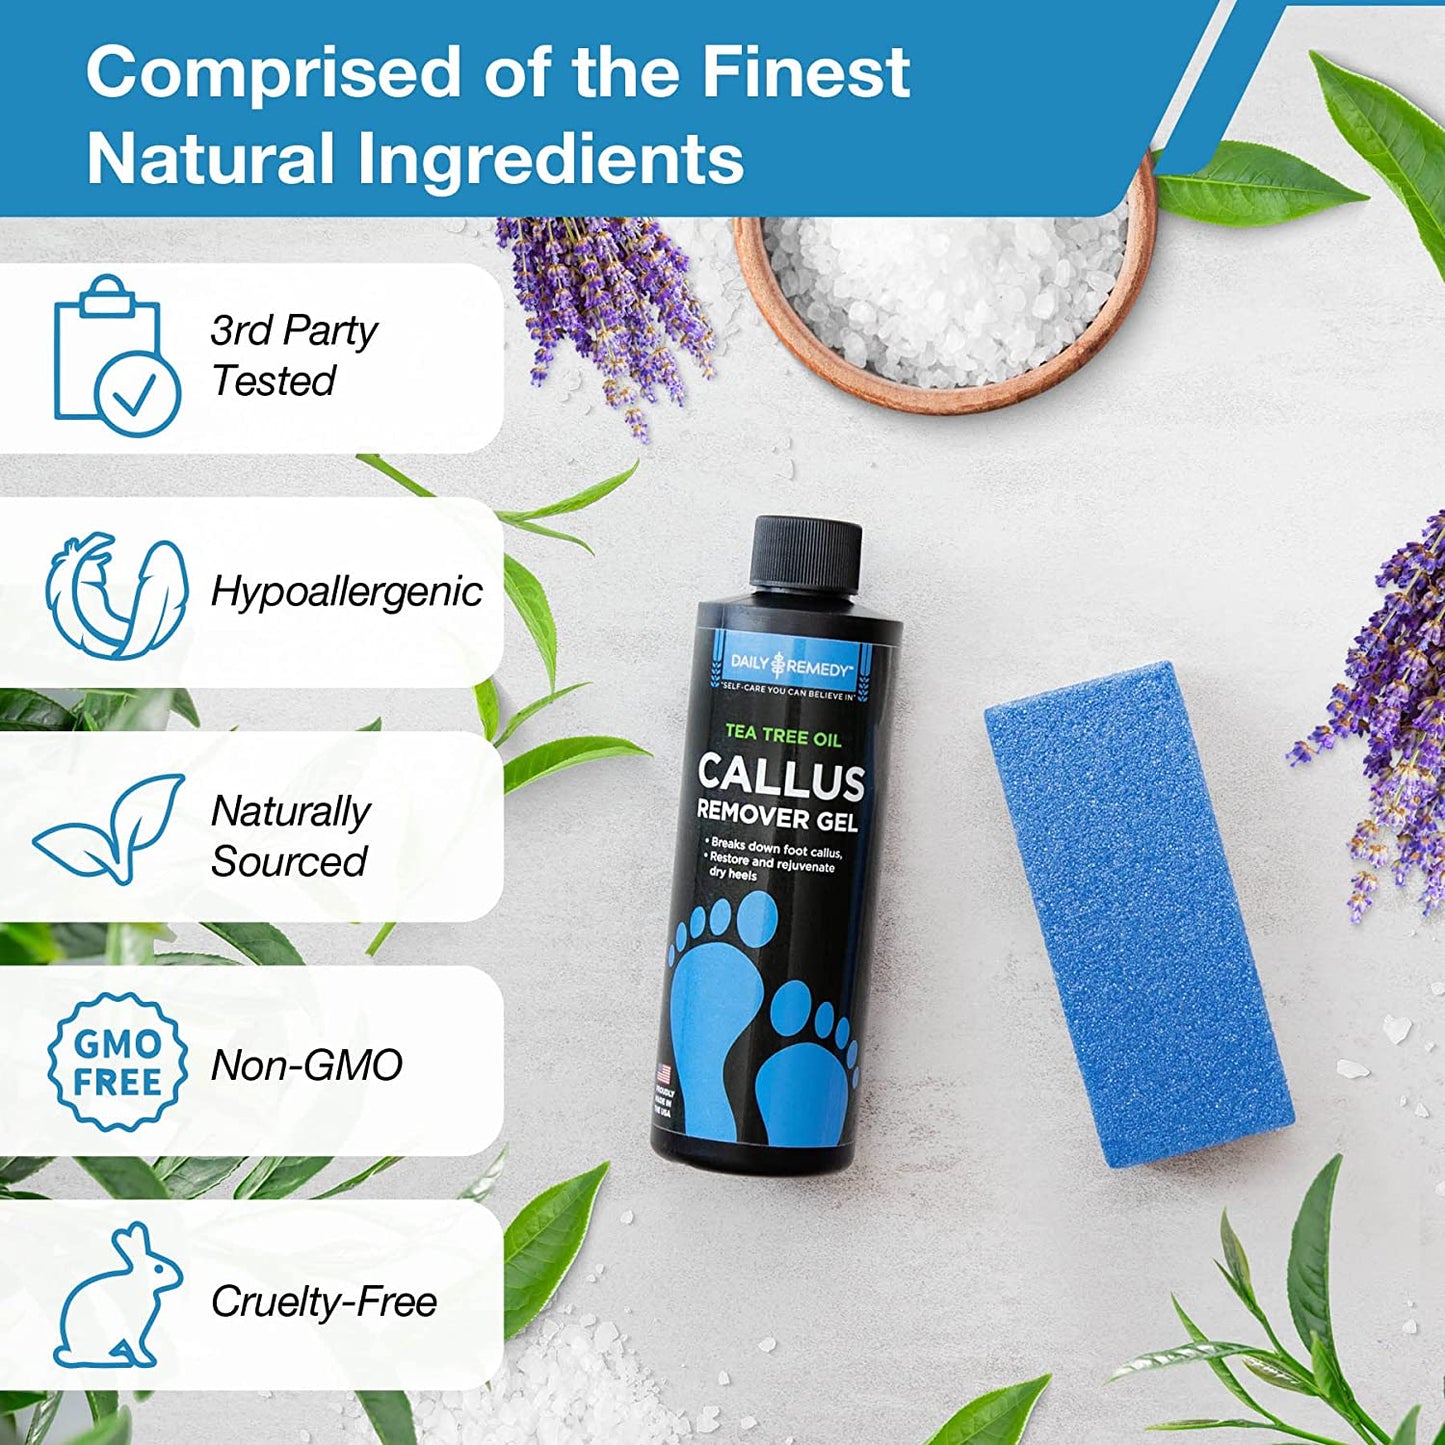 Professional Best Callus Remover Gel for Feet and Foot Pumice Stone  Scrubber Kit Remove Hard Skins Heels and Tough Callouses from feet Quickly  and